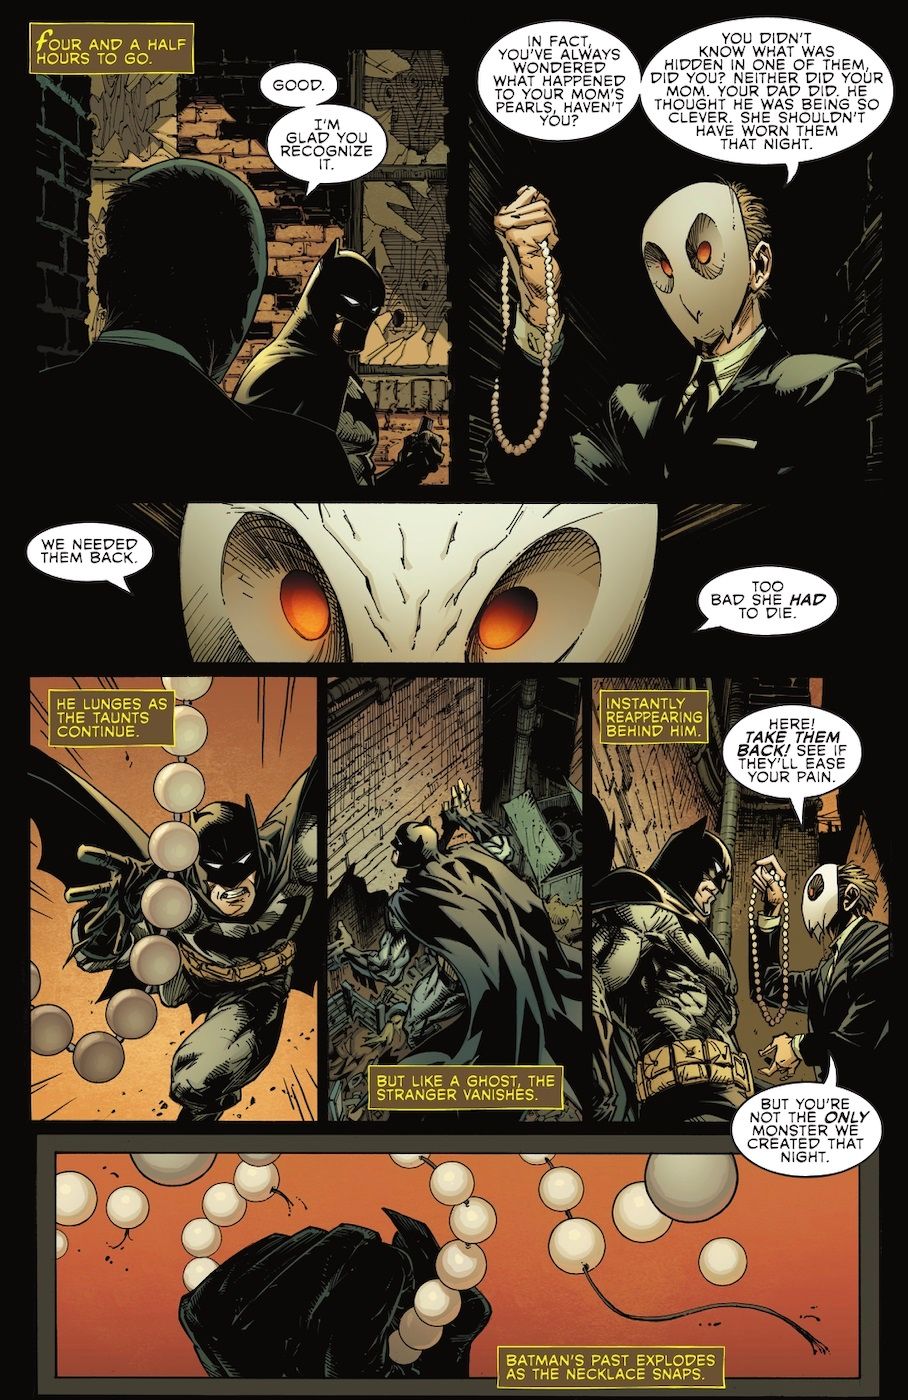 Gotham's Court of Owls May Have Been Responsible for Batman's Creation